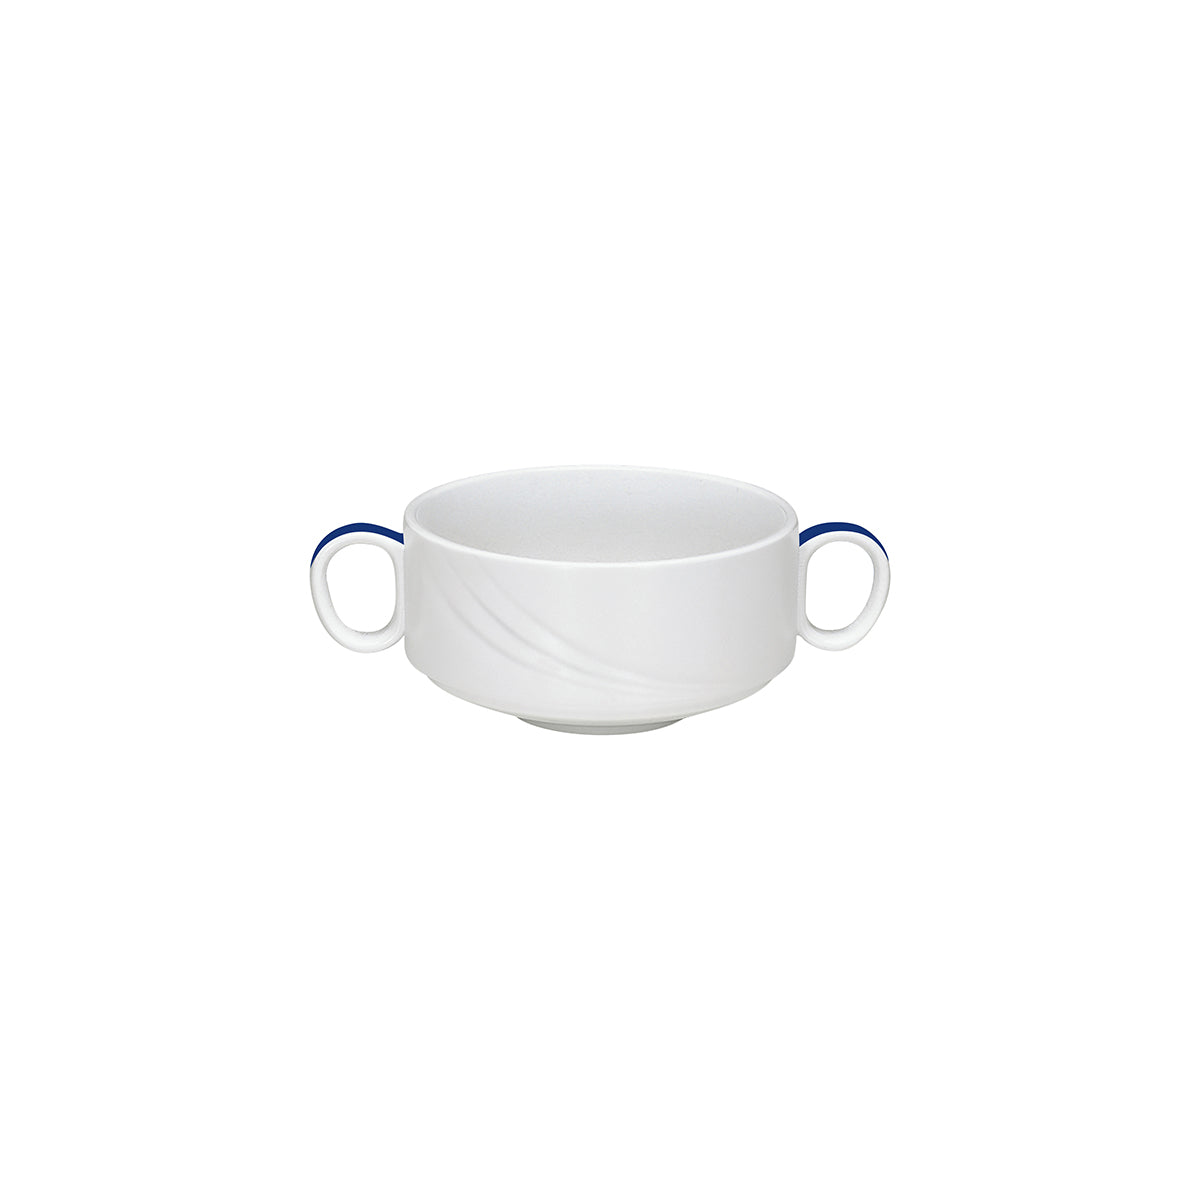 SH9182740/62971 Donna Senior Decor Stackable Soup Cup with 2 Handles with Dark Blue Band 108x66mm / 480ml Tomkin Australia Hospitality Supplies